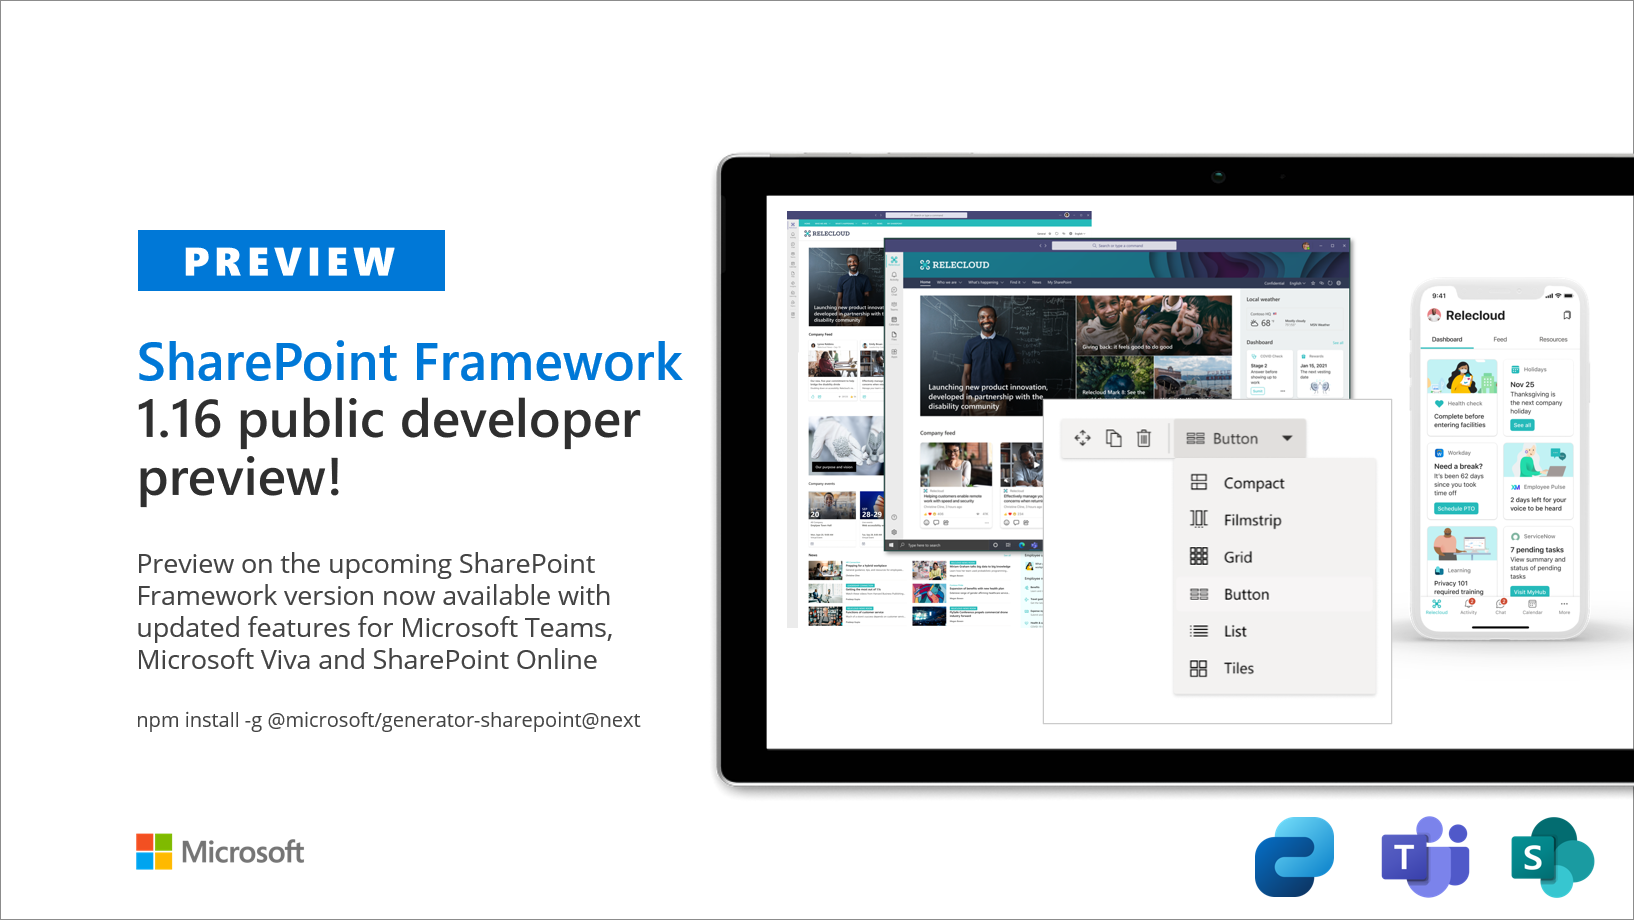 Public preview of SharePoint Framework 1.16 – First release of upcoming features